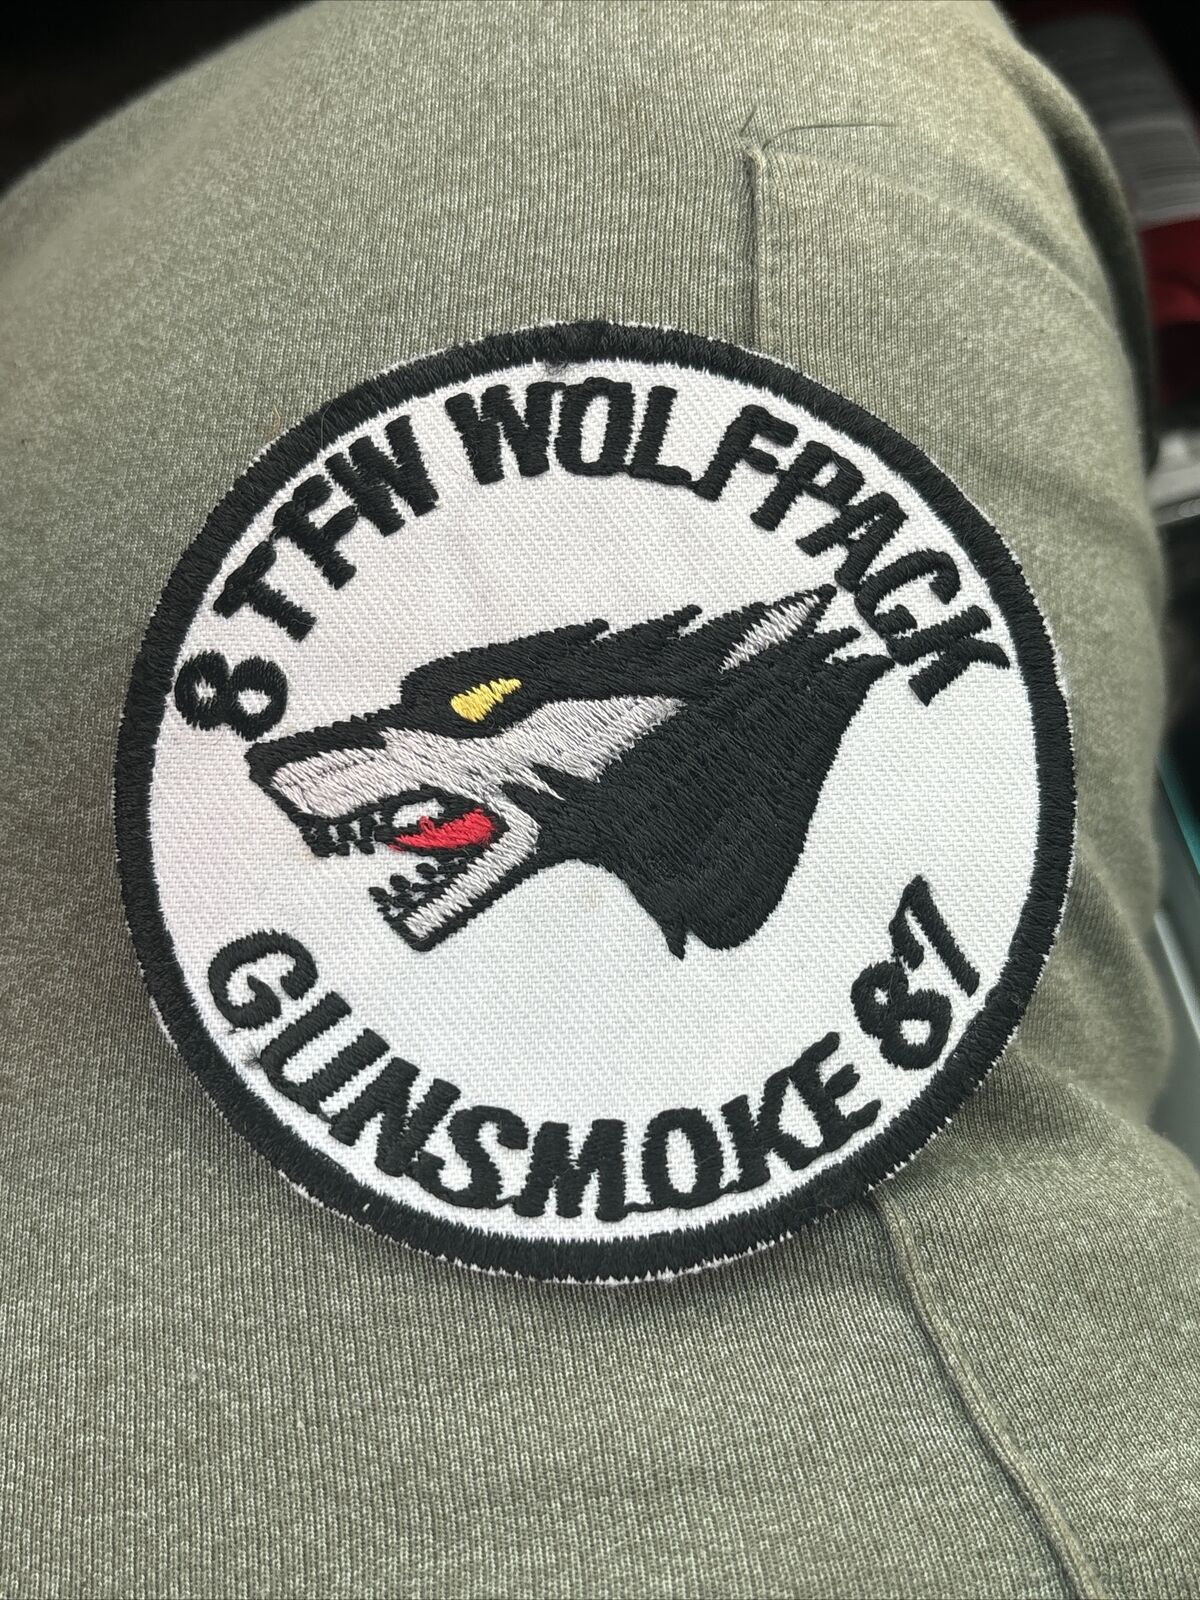 USAF 1987 GUNSMOKE FIGHTER MEET US AIR FORCE 8TH TFW WOLFPACK PATCH Vtg Rare